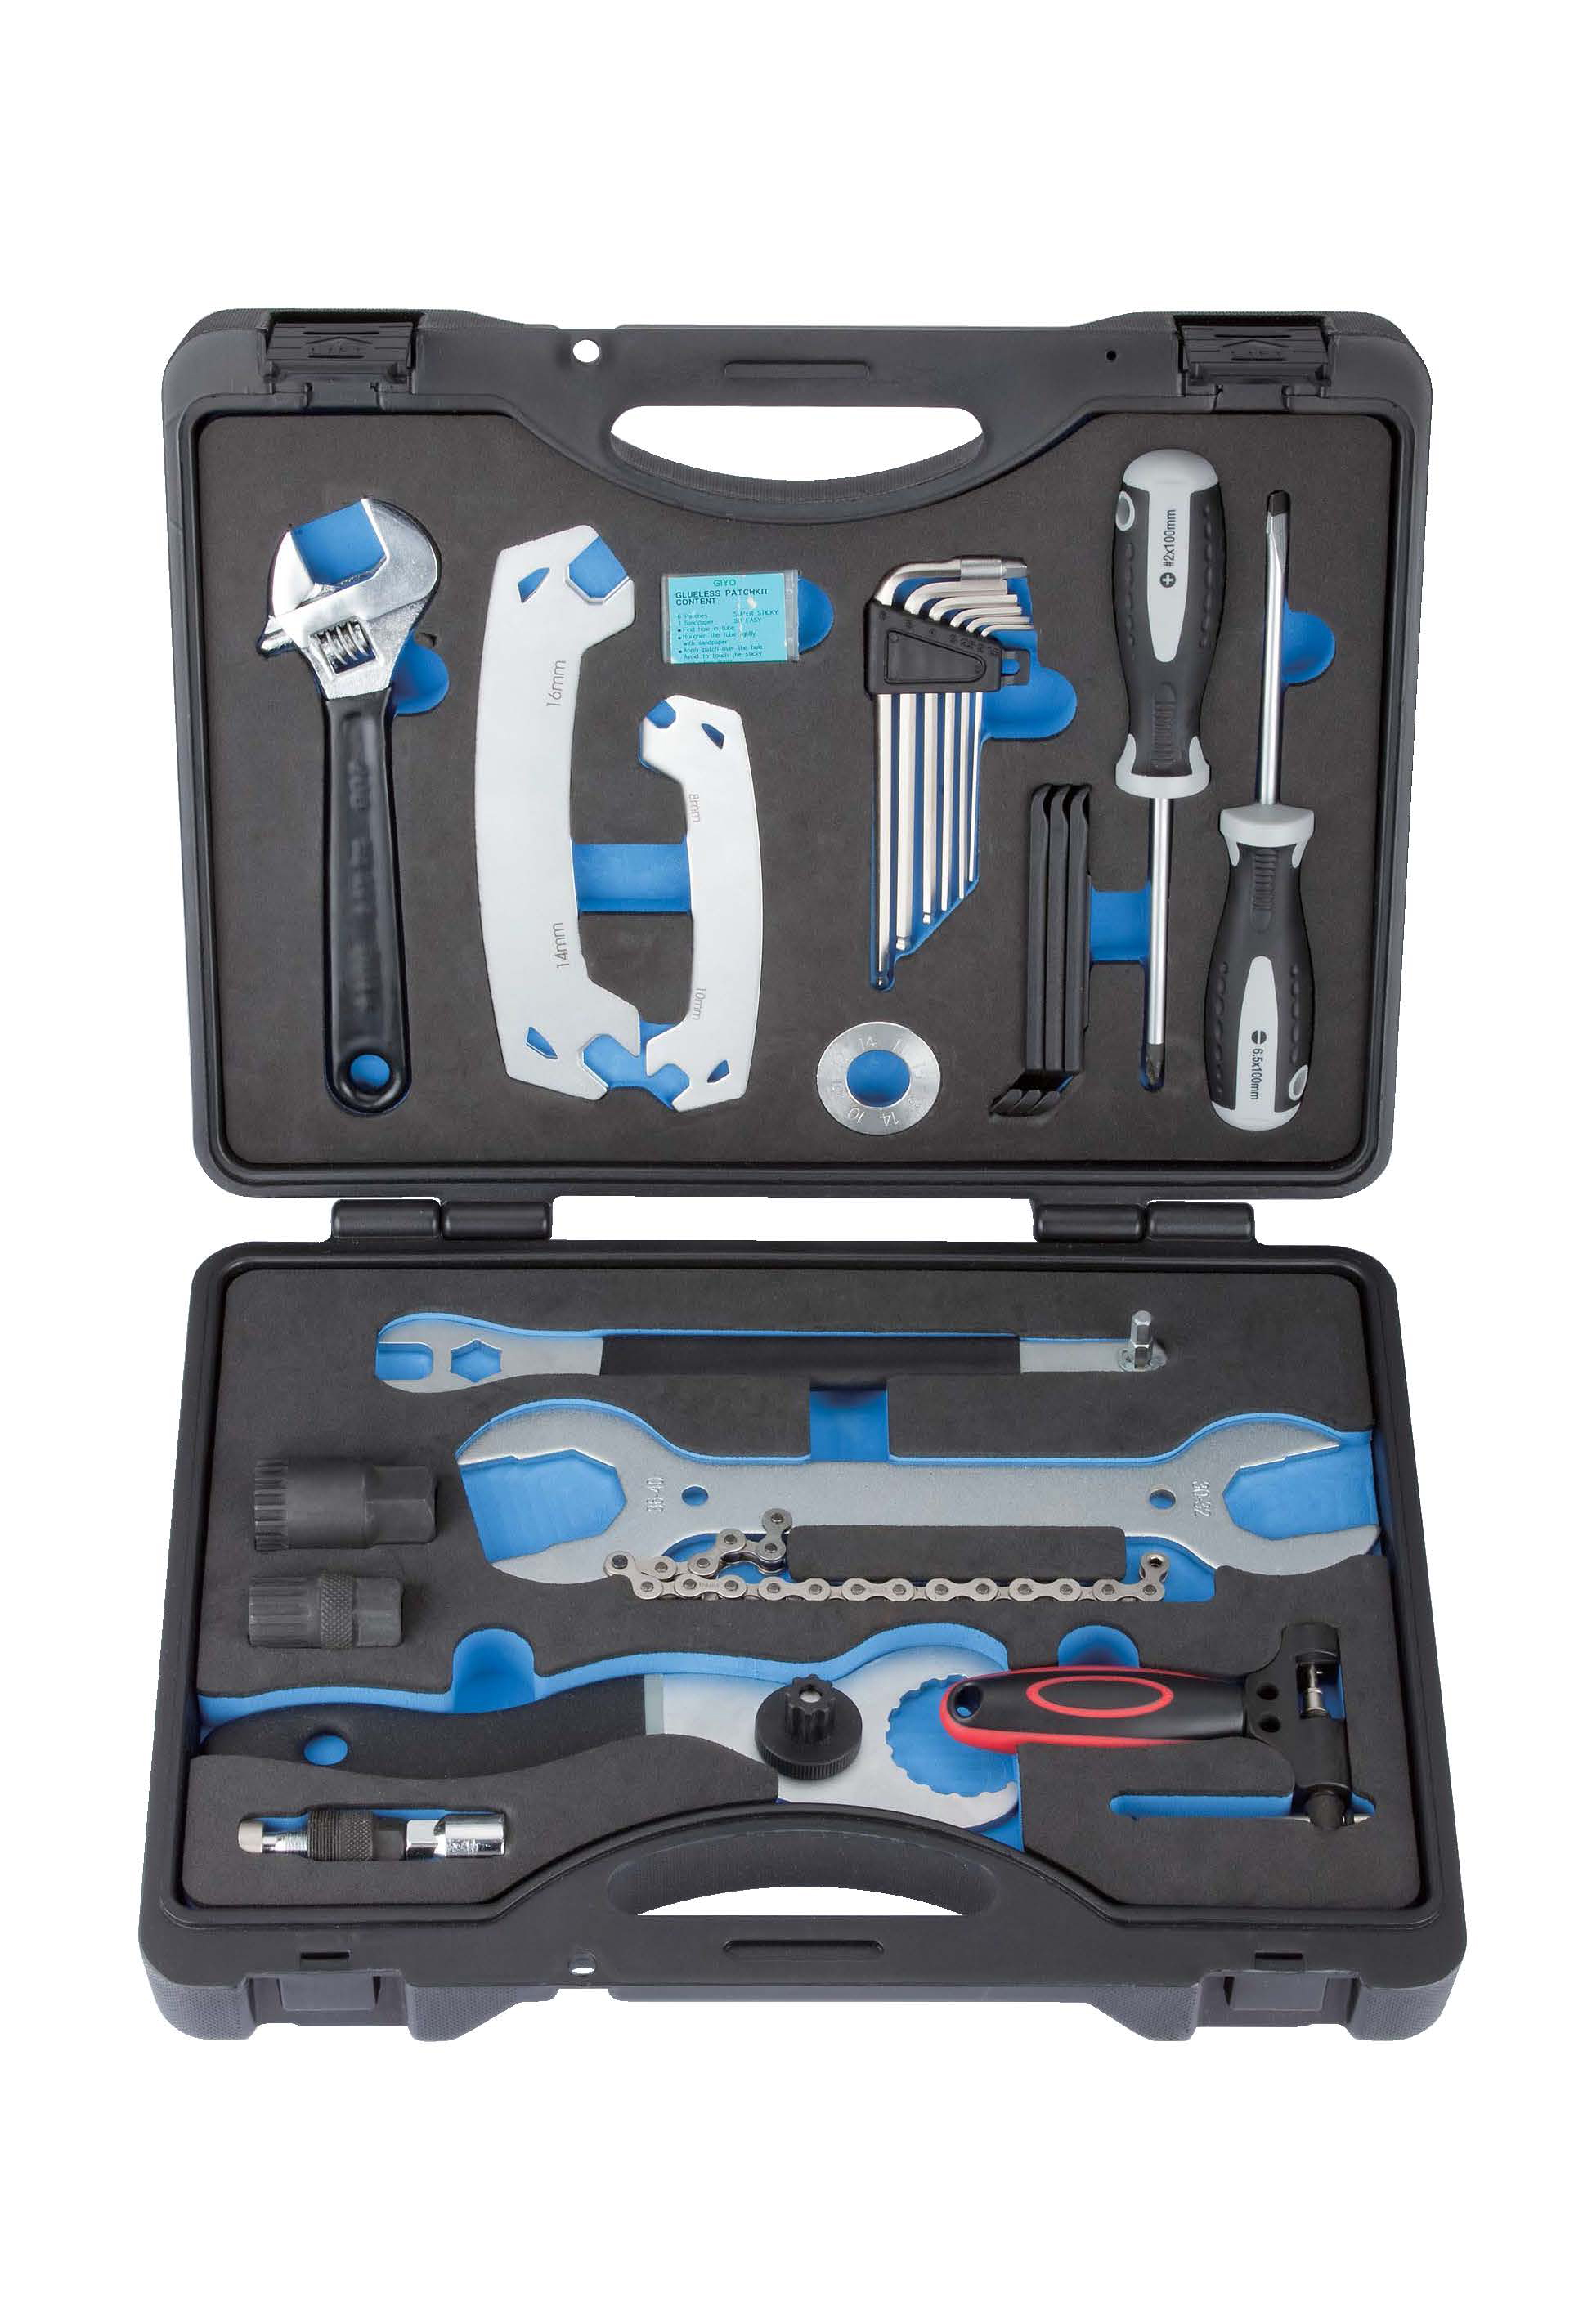 42 in 1 tools set